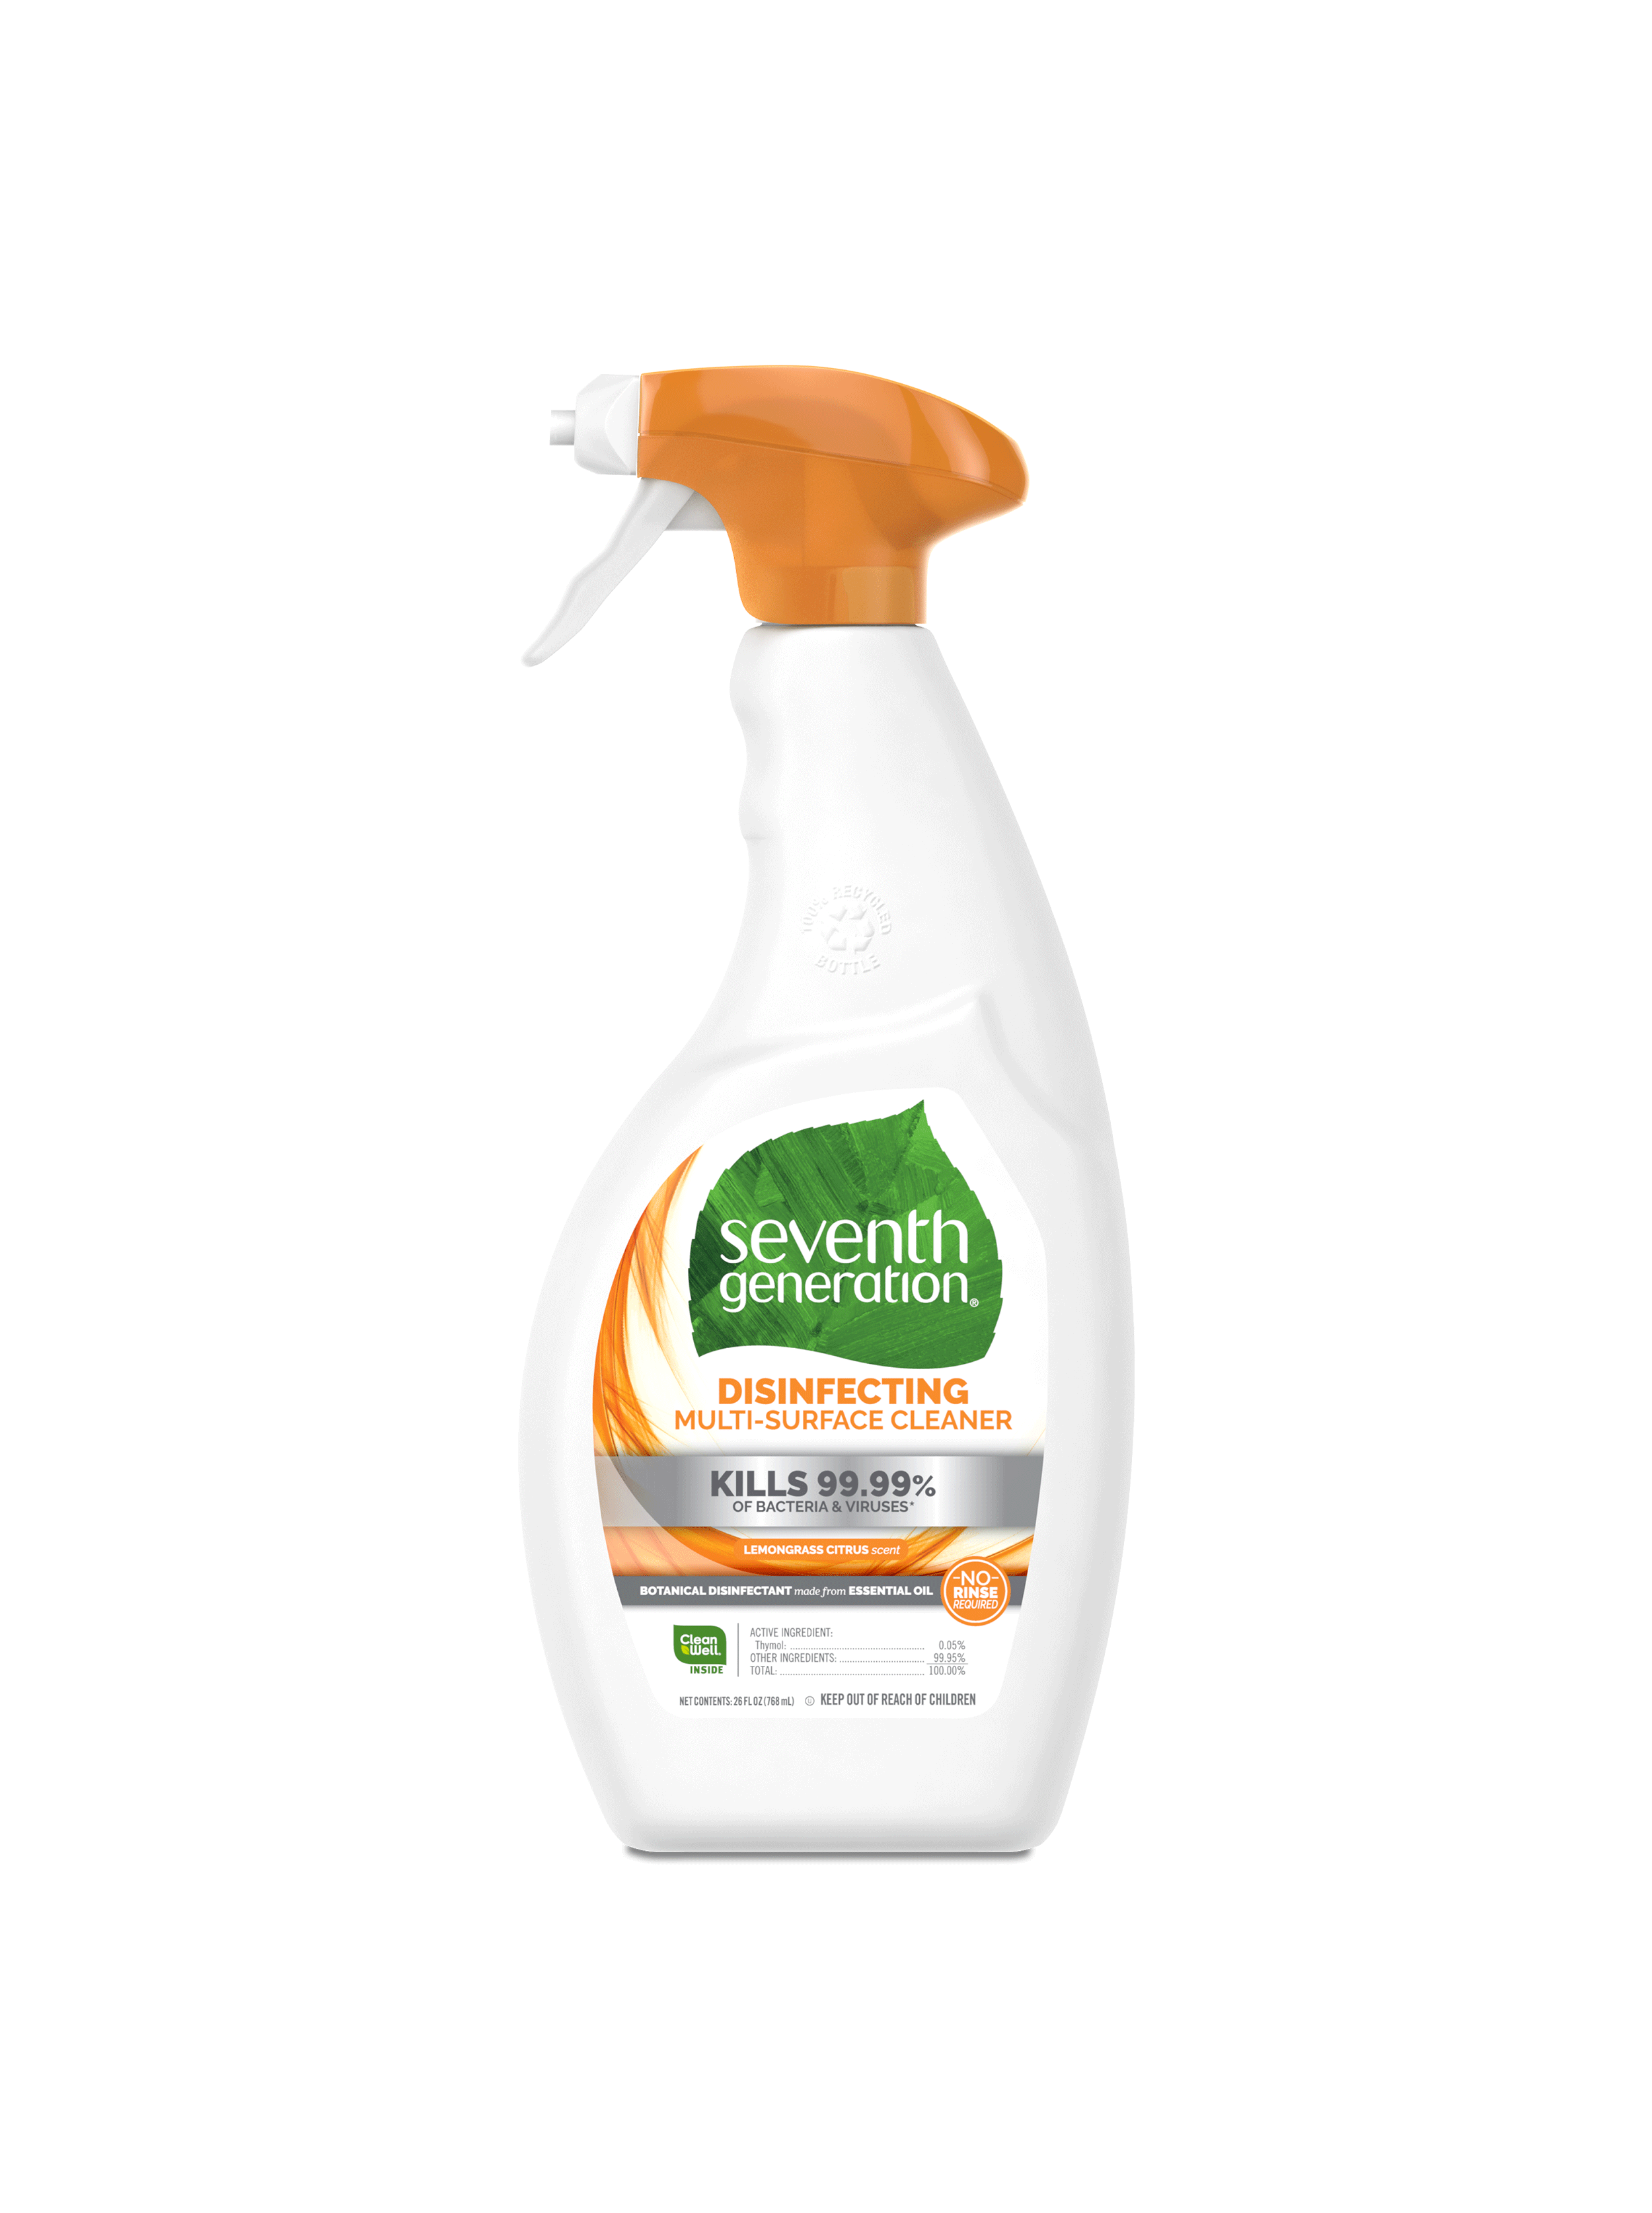 Bottle Bright Natural Cleaning Tablets Review - Safe and Effective?